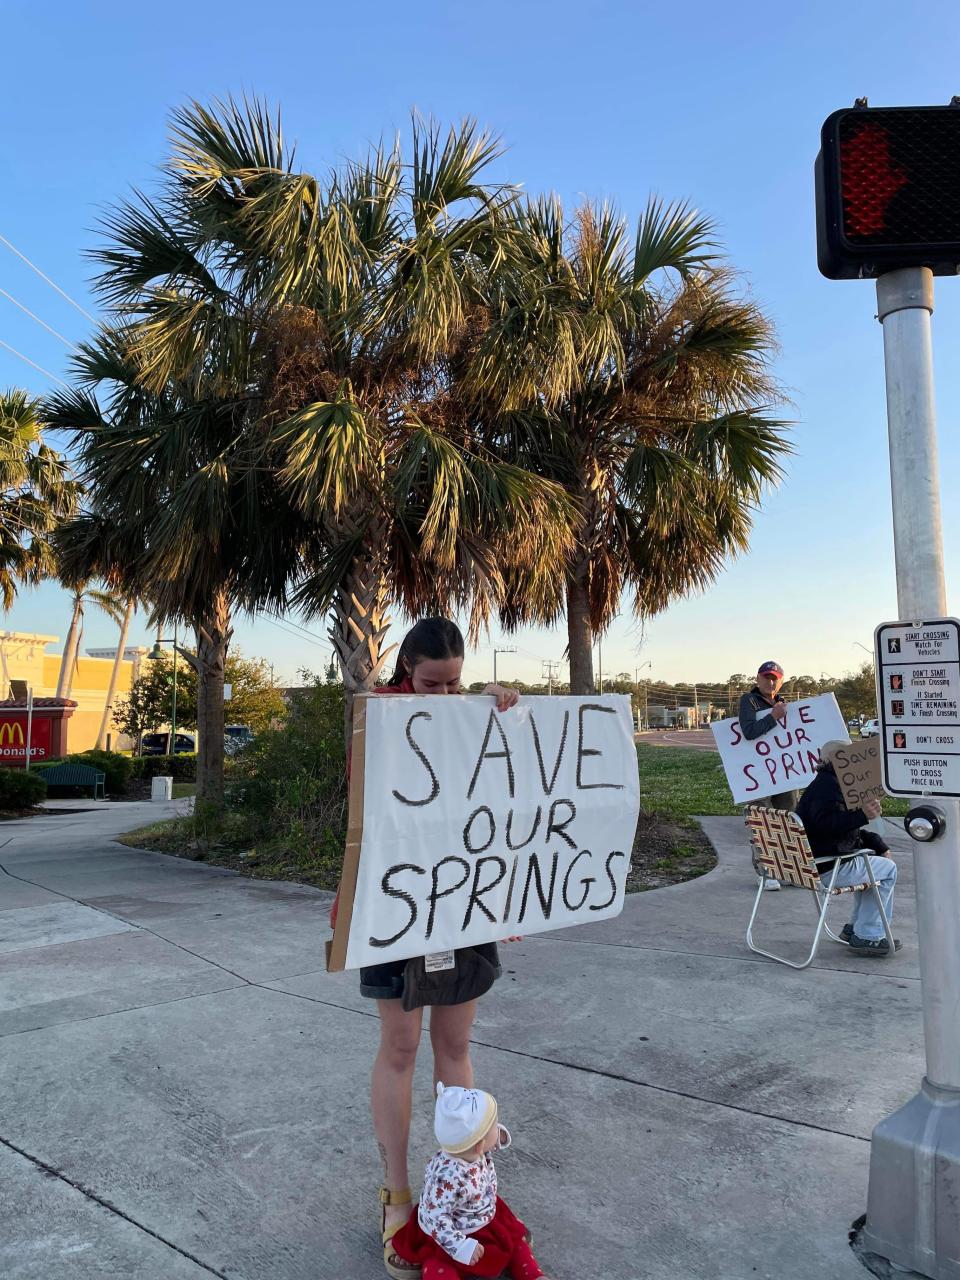 Residents seeking to persuade the North Port City Commission to abandon its plan to develop vacant park land adjacent to Warm Mineral Springs, rallied at the intersection of Price and Sumter boulevards on Dec. 23. Another rally was scheduled for Dec. 30.